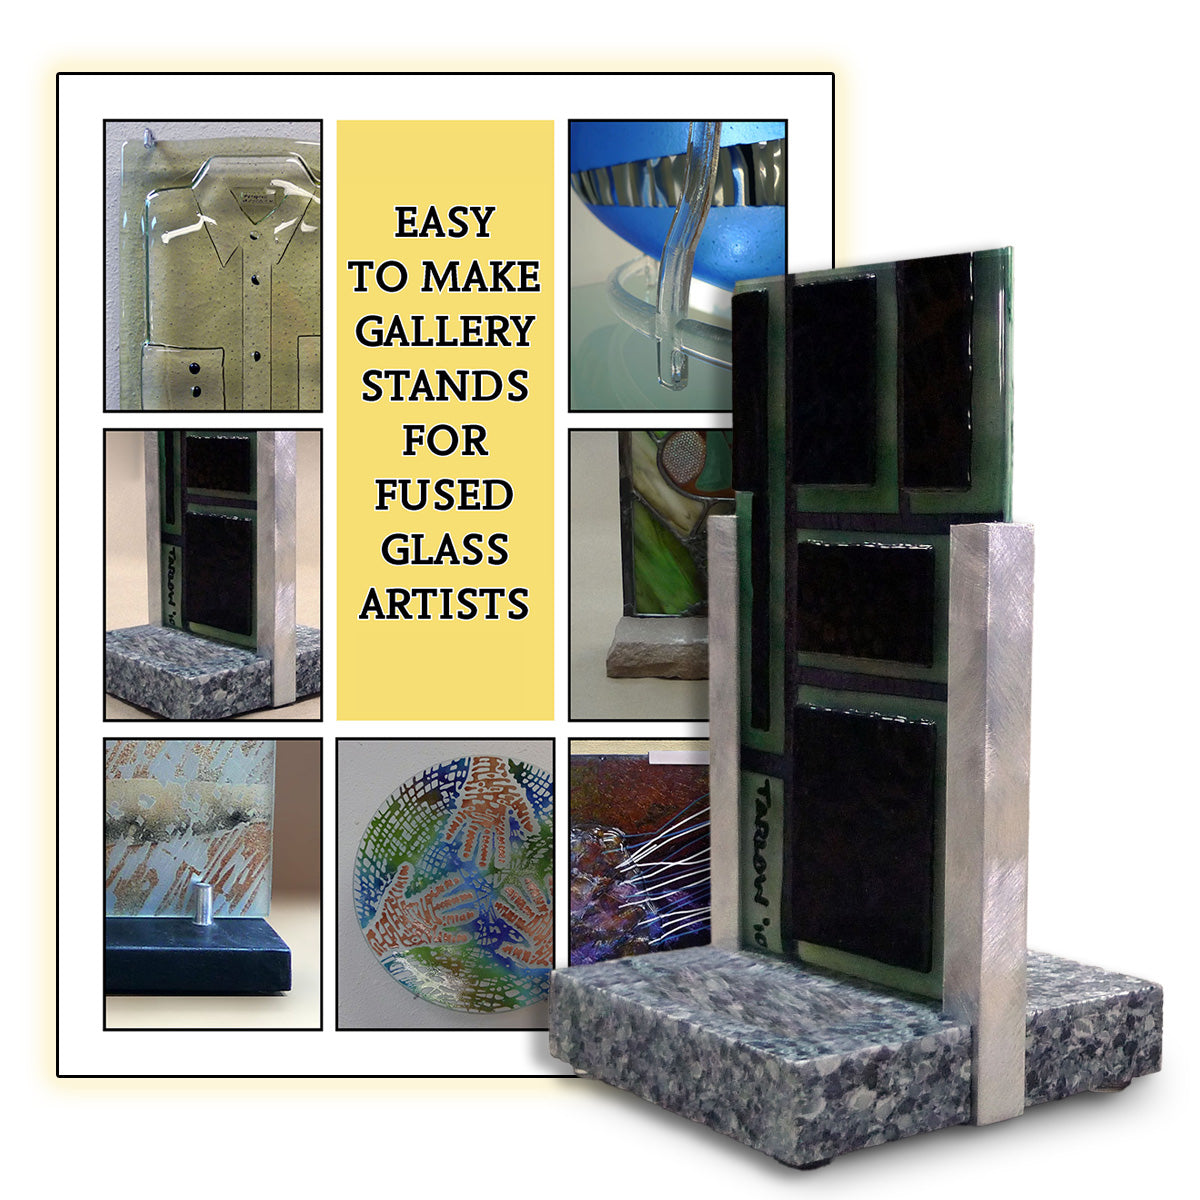 Easy to Make Gallery Stands for Fused Glass Artists